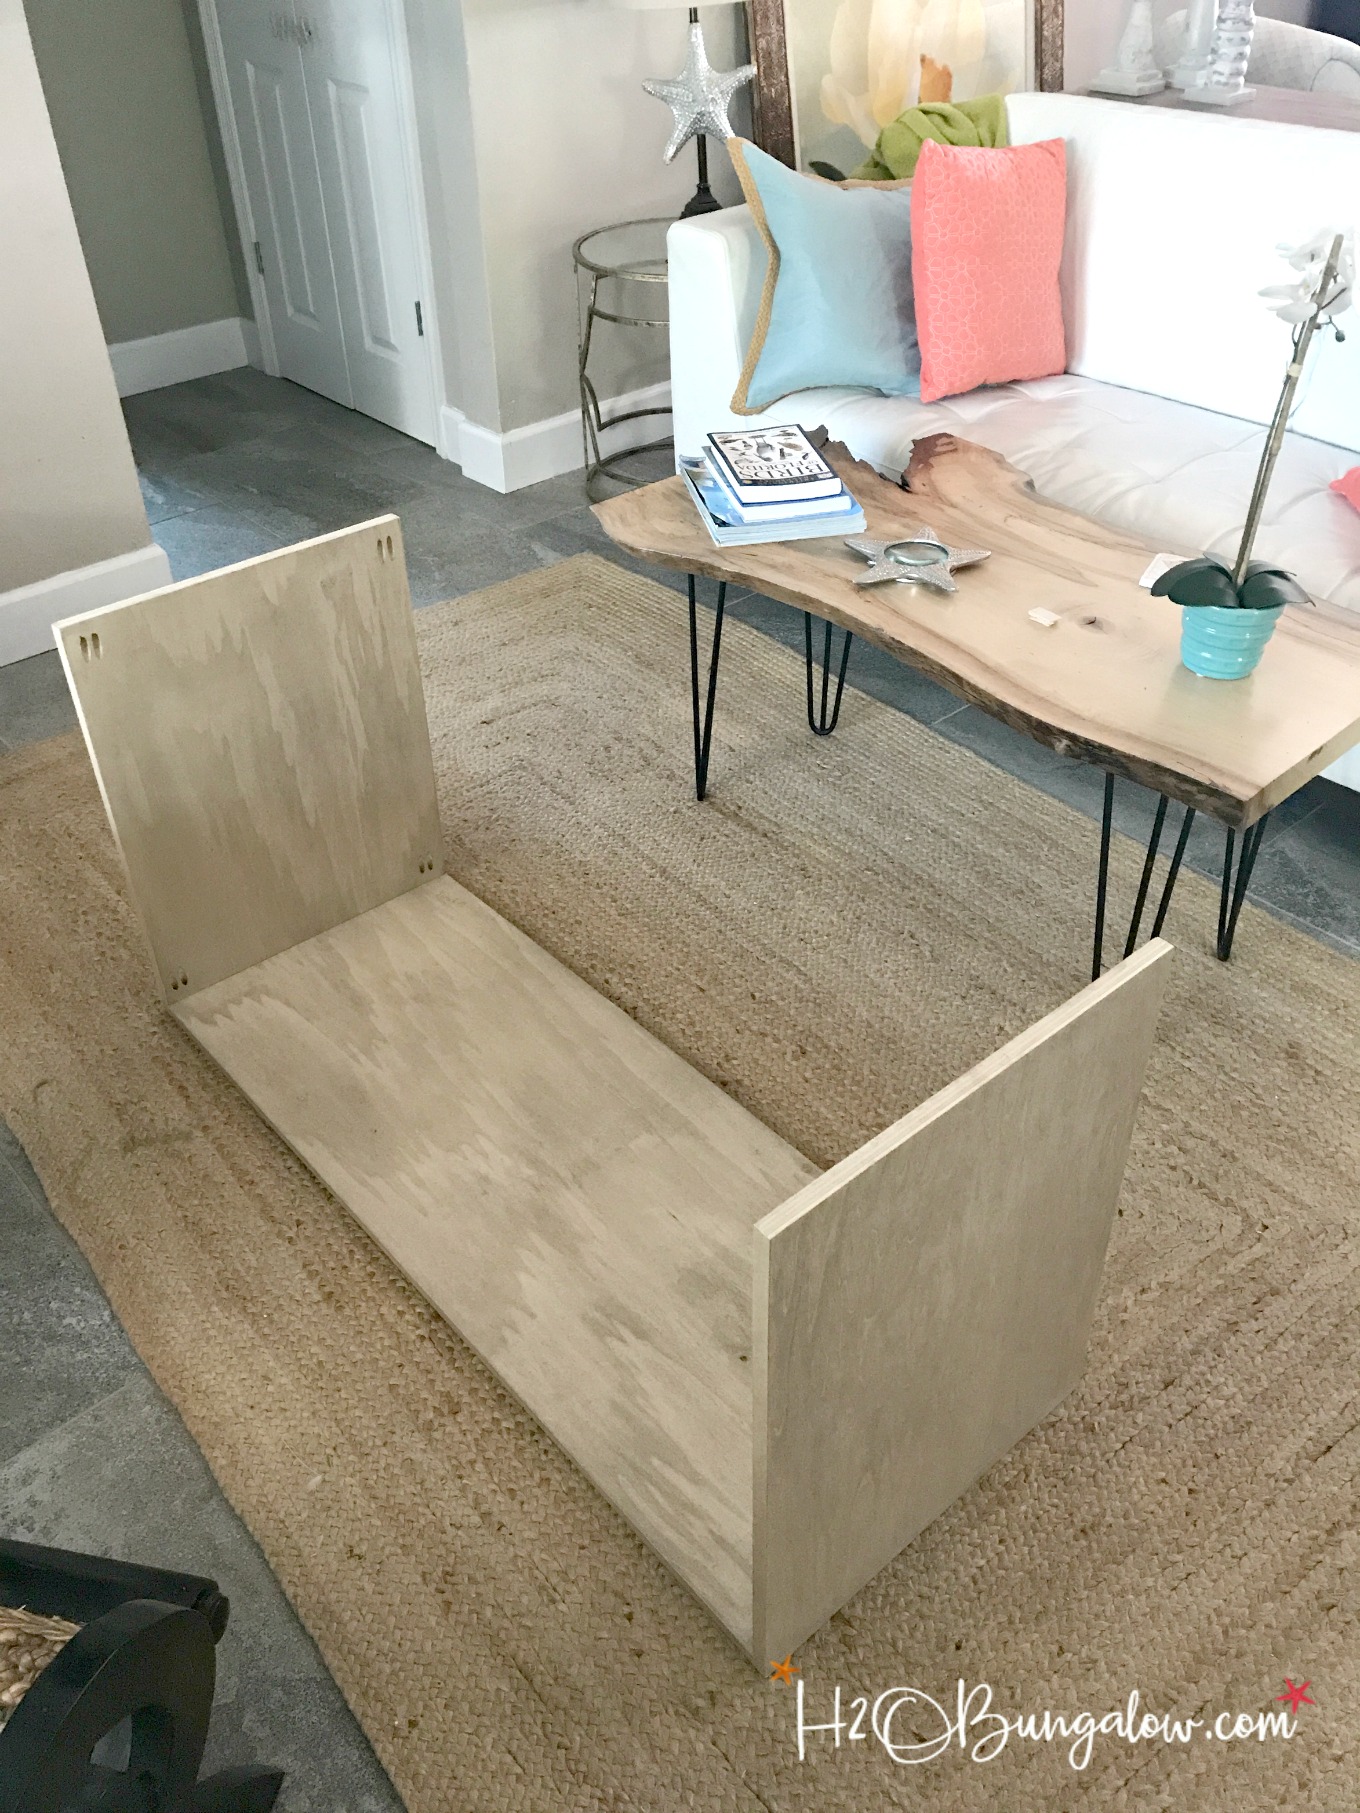 DIY media console with free plans tutorial. Build a media cabinet to hold electronics, add the matching wall mounted TV cabinet. Looks great in small spaces